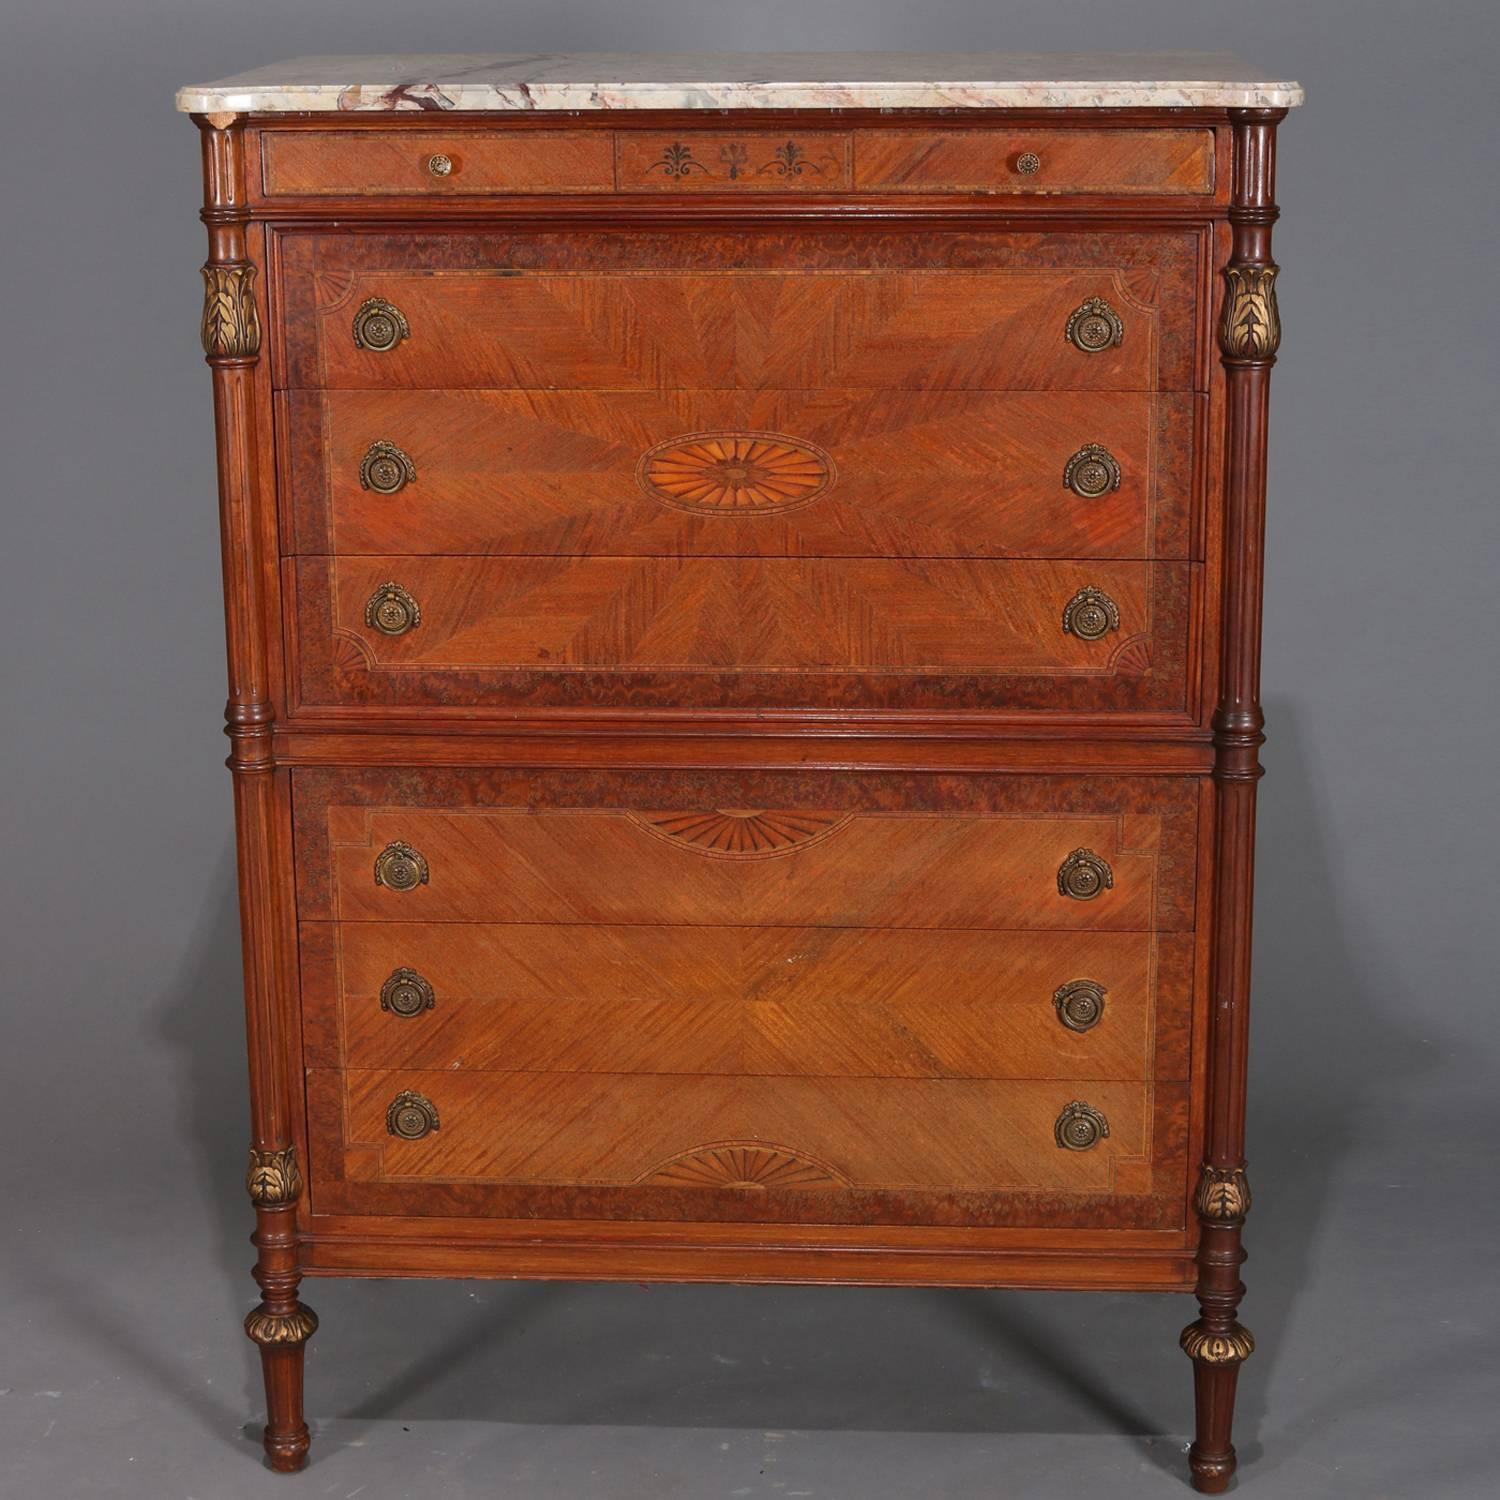 Antique French Louis XVI style high chest features case with shaped marble top above bookmatched feather patterned drawers flanked by carved columns with gilt acanthus decoration, drawers are burl framed and banded having central inlaid pertera, top